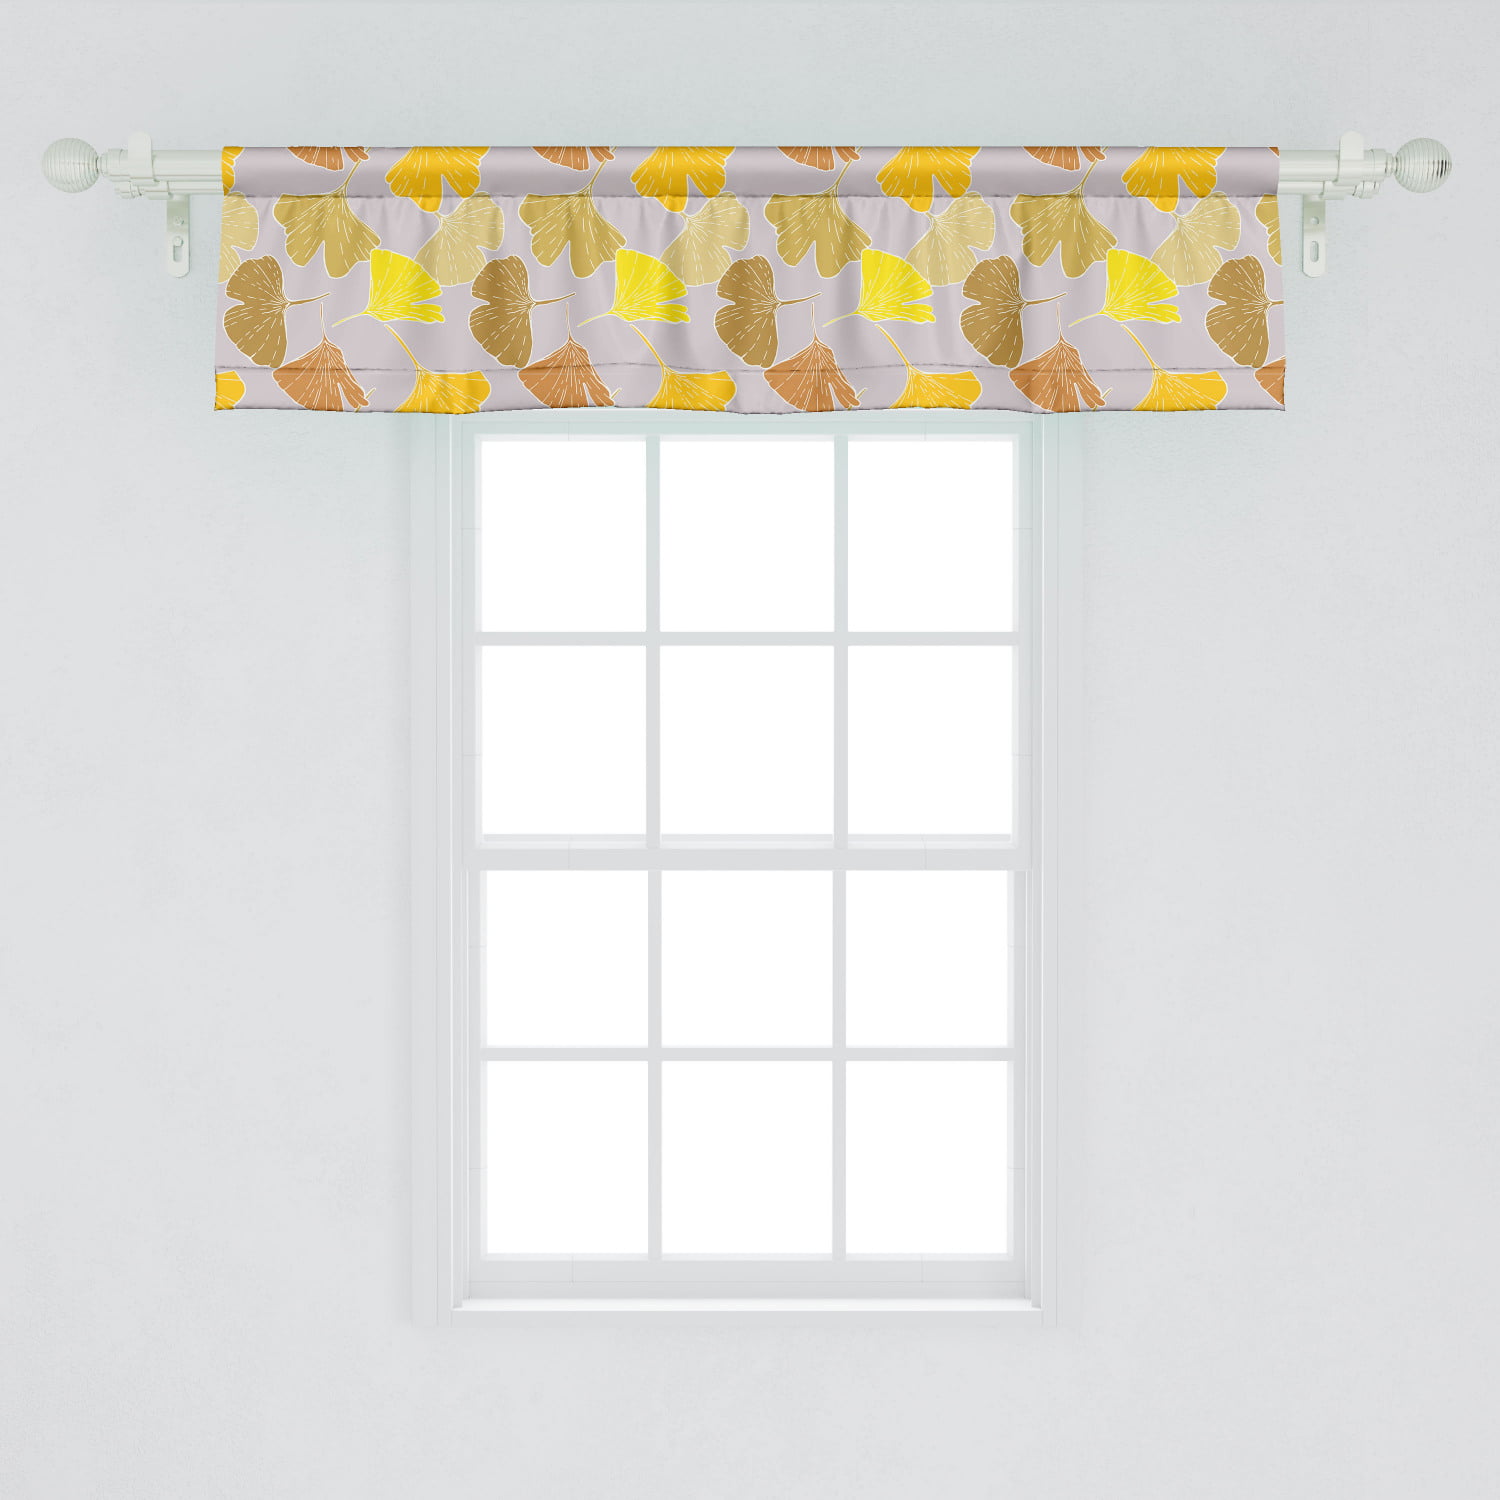 Ambesonne Leaves Window Valance, Hand Drawn Exotic Foliage Ginkgo Leaves  Pattern Forest Woodland Nature Design, Curtain Valance for Kitchen Bedroom  ... Design